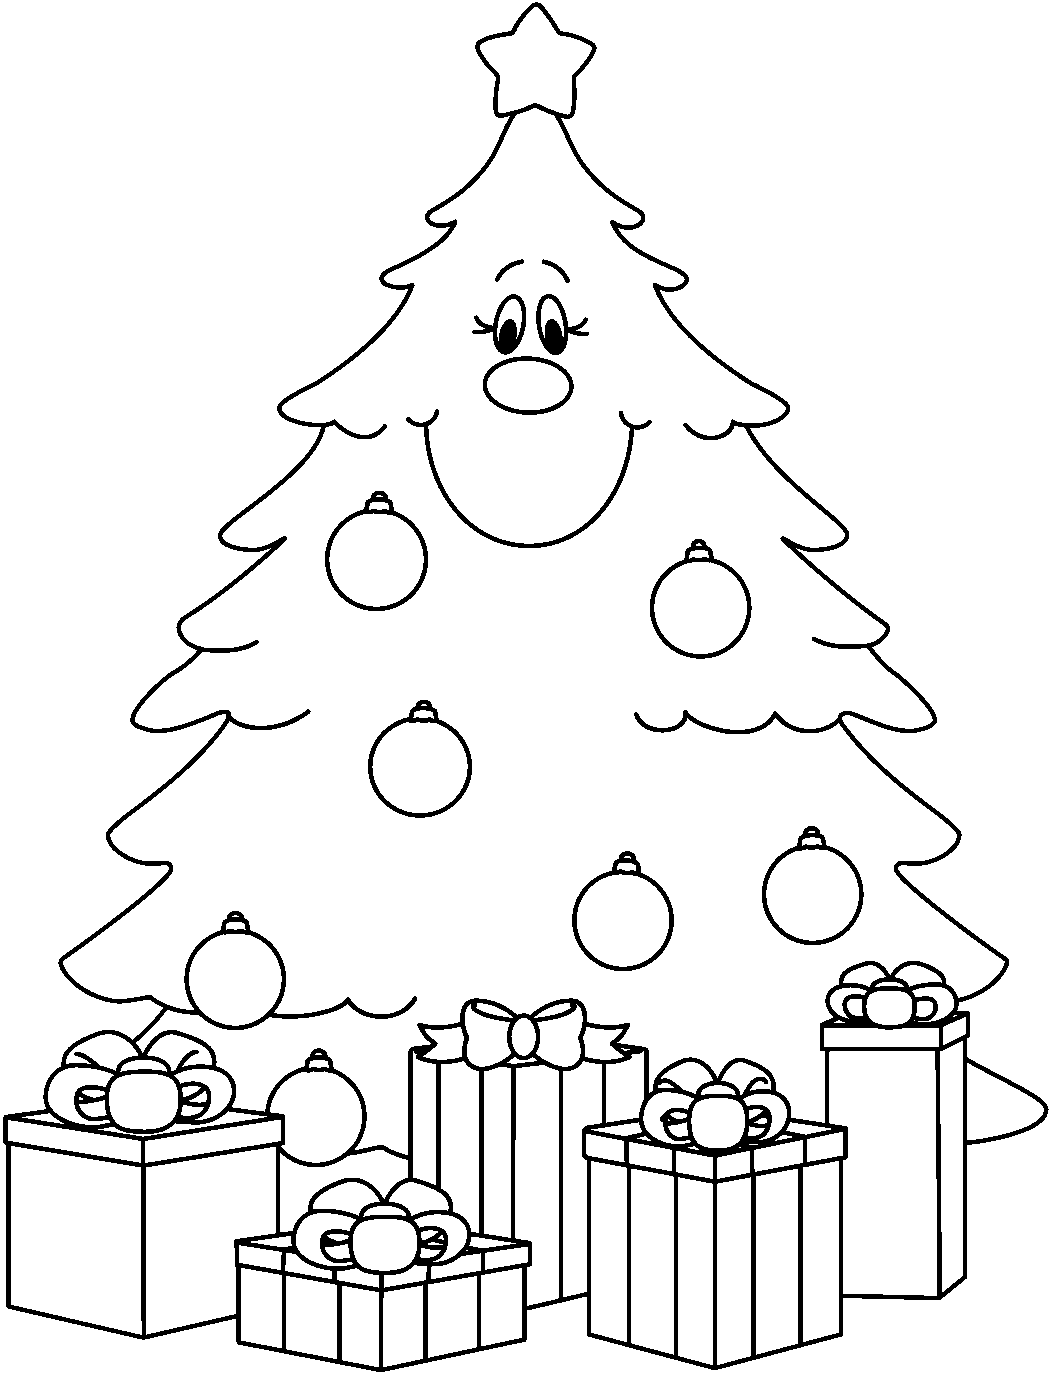 Black and White Clipart - Christmas Tree Clip Art Black And White